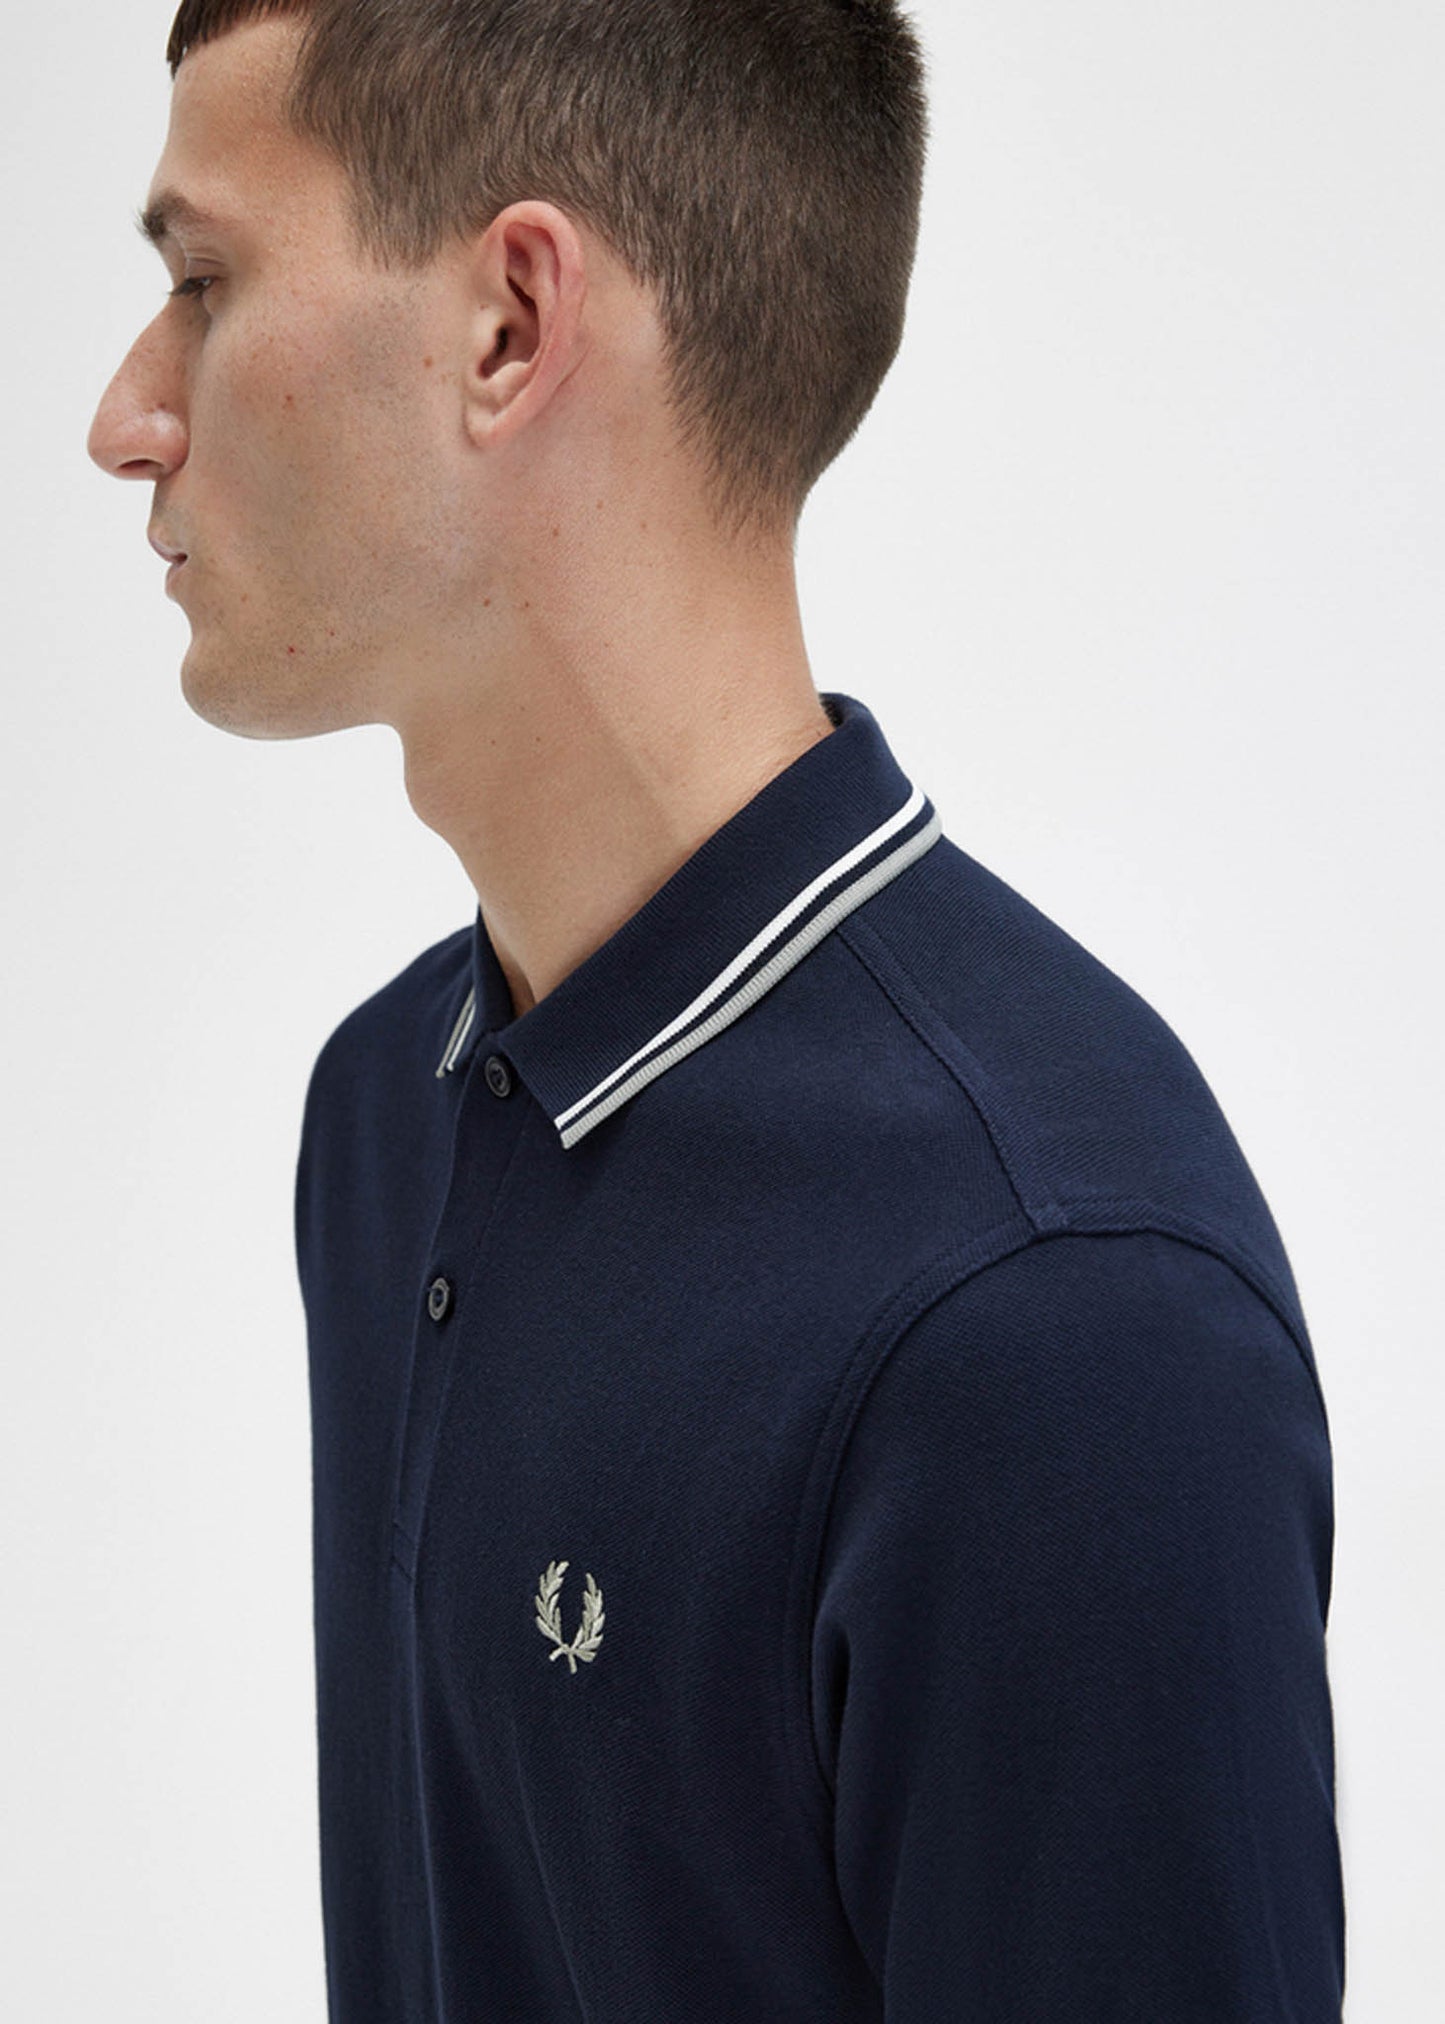 Twin tipped fred perry shirt - navy snow white seagrass